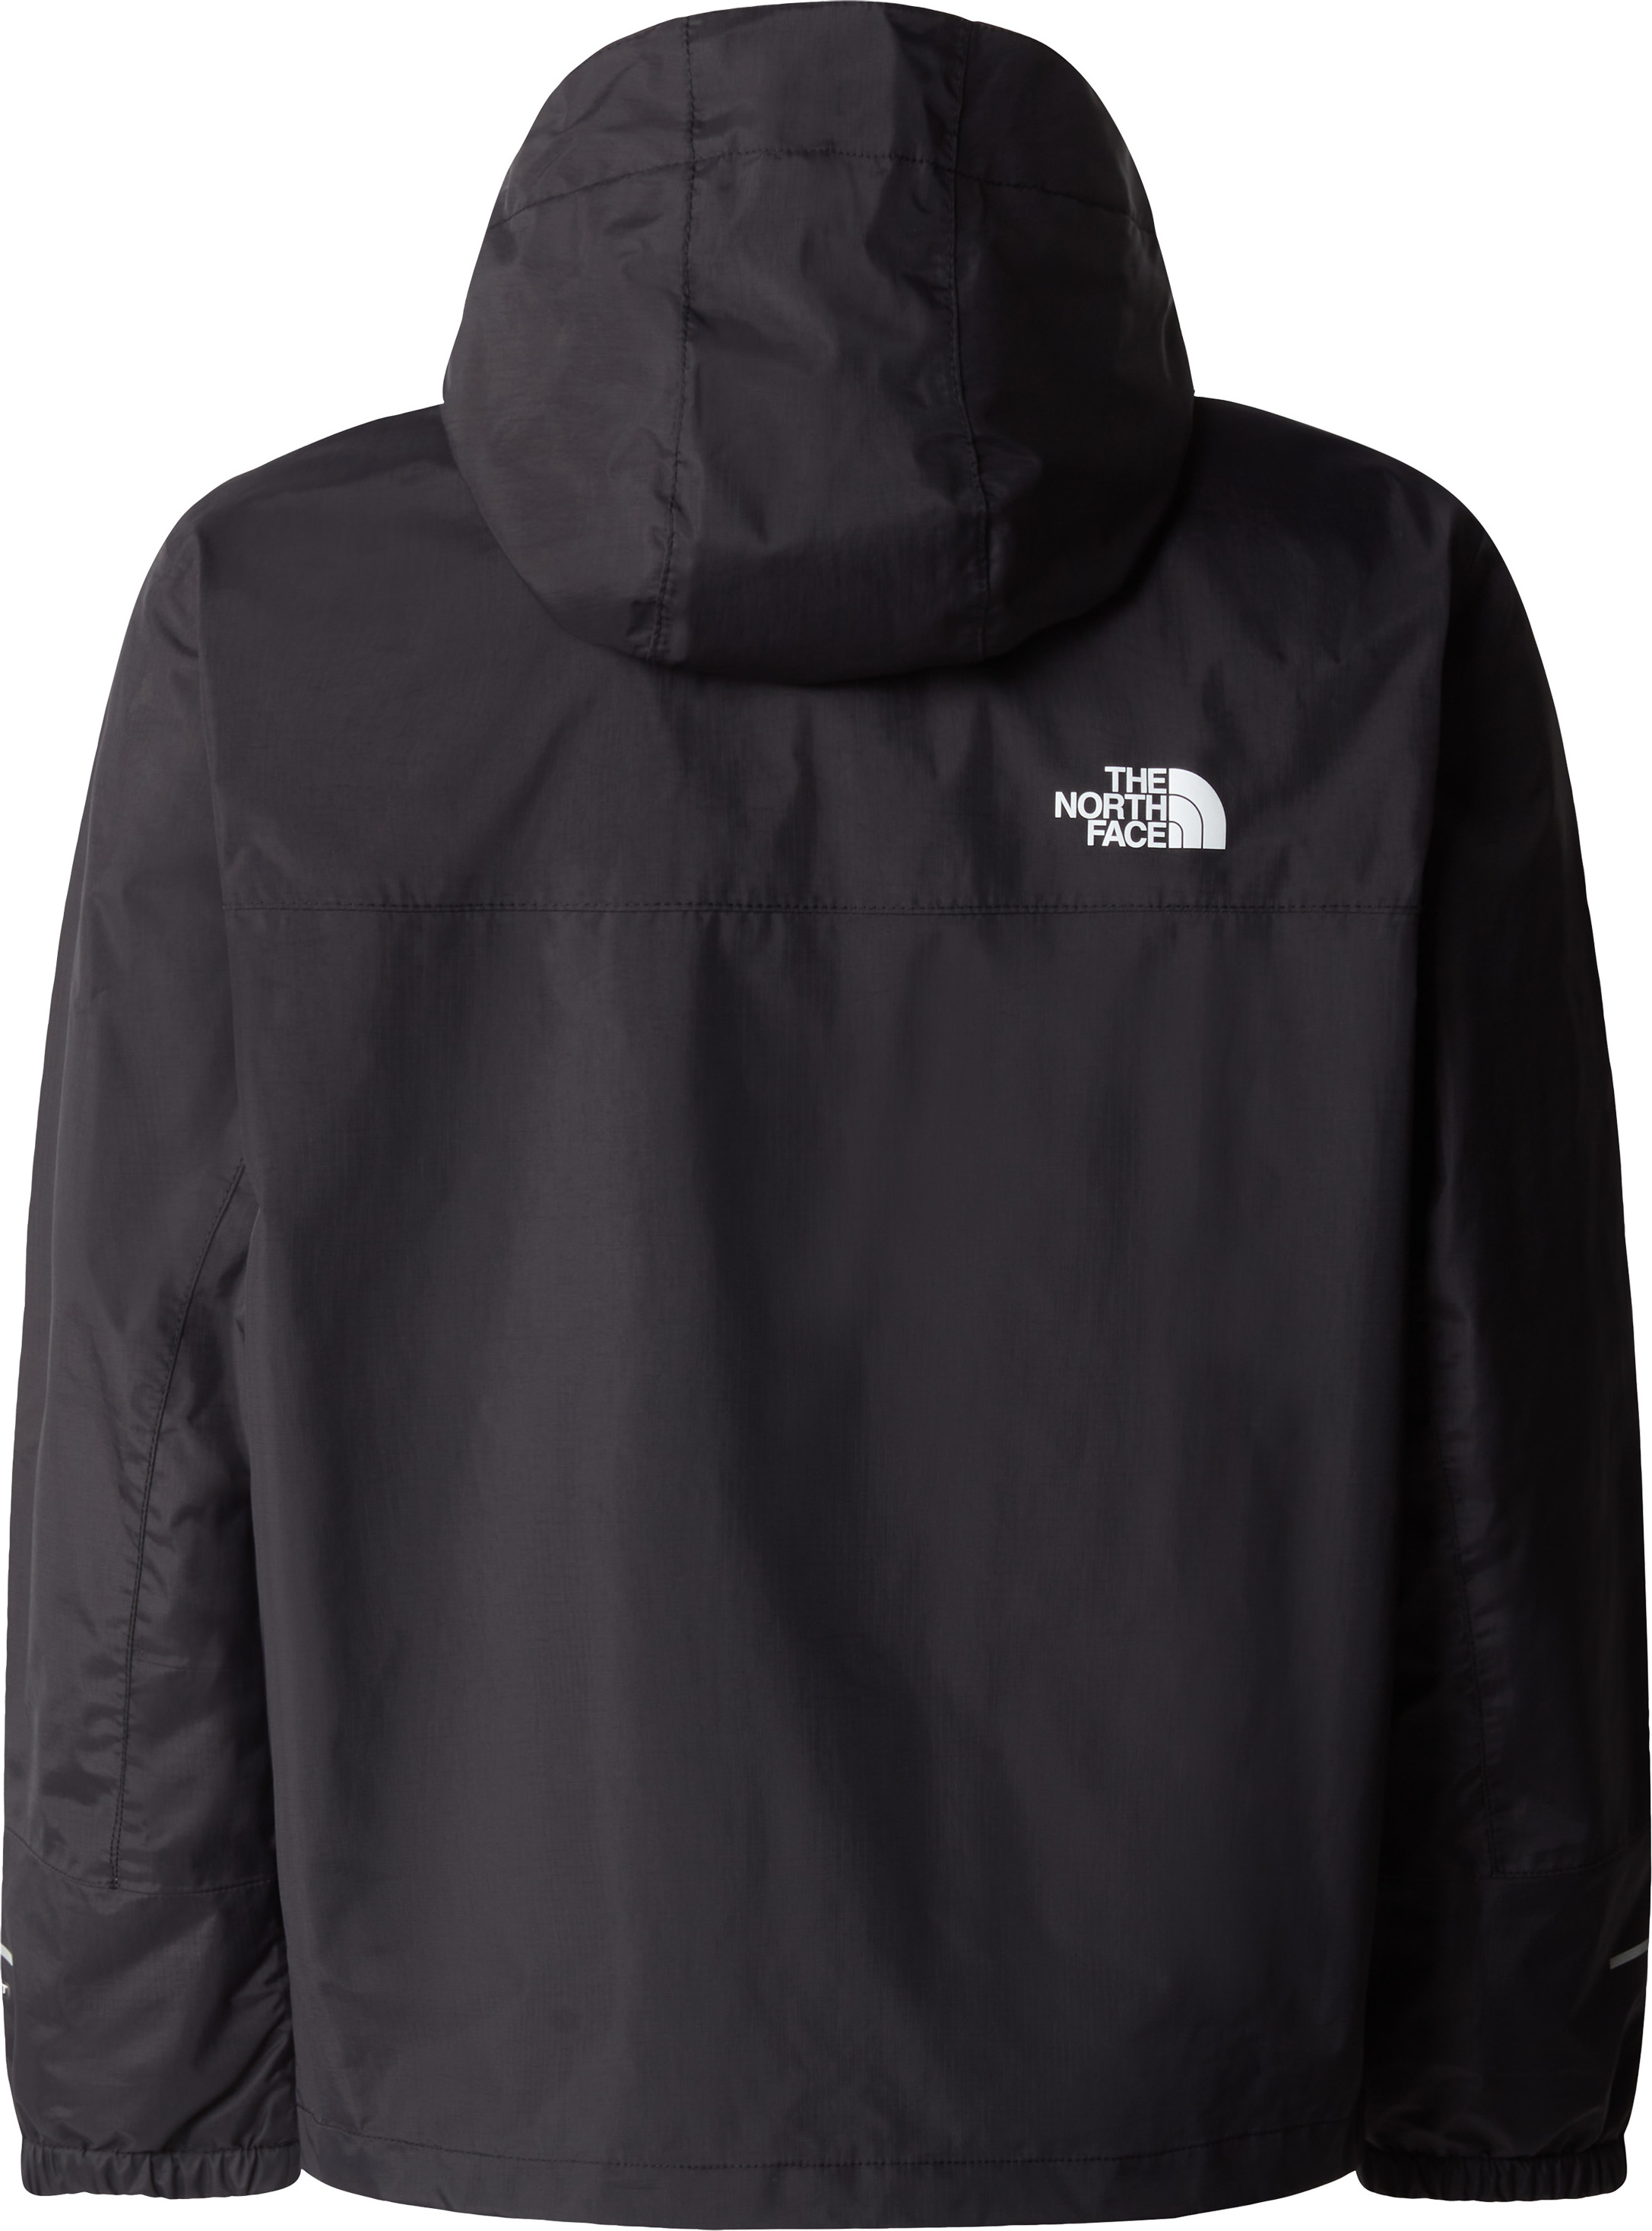 Buy The North Face B Antora Rain Jacket TNF Black here | Outnorth